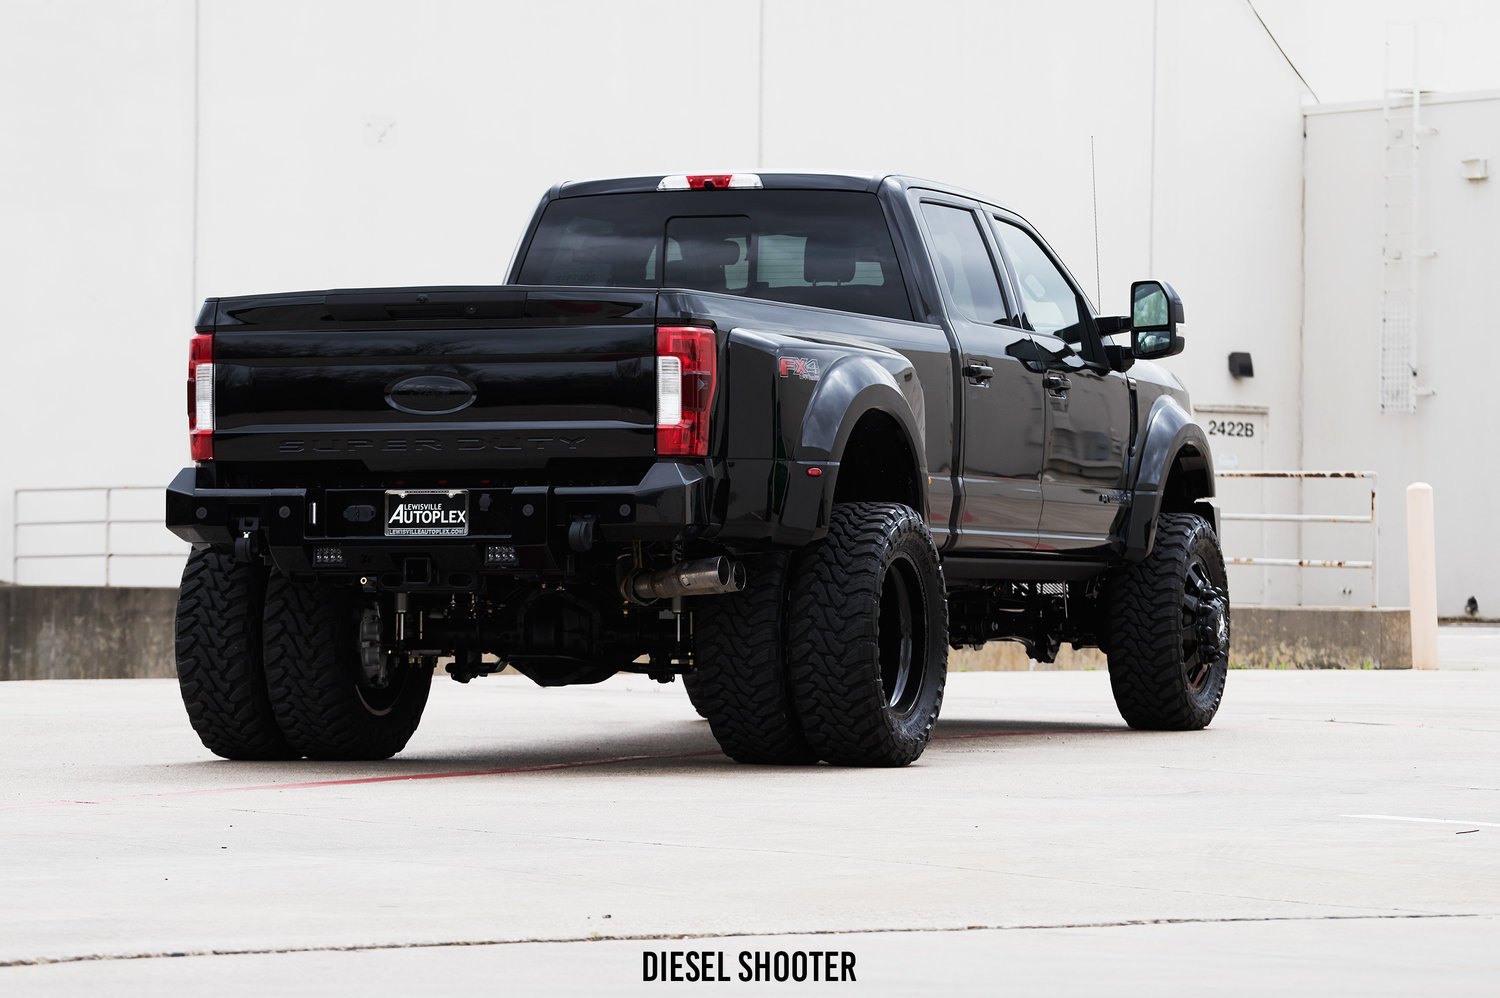 Lifted Ford Super Duty on Toyo Tires - Photo by Diesel Shooter